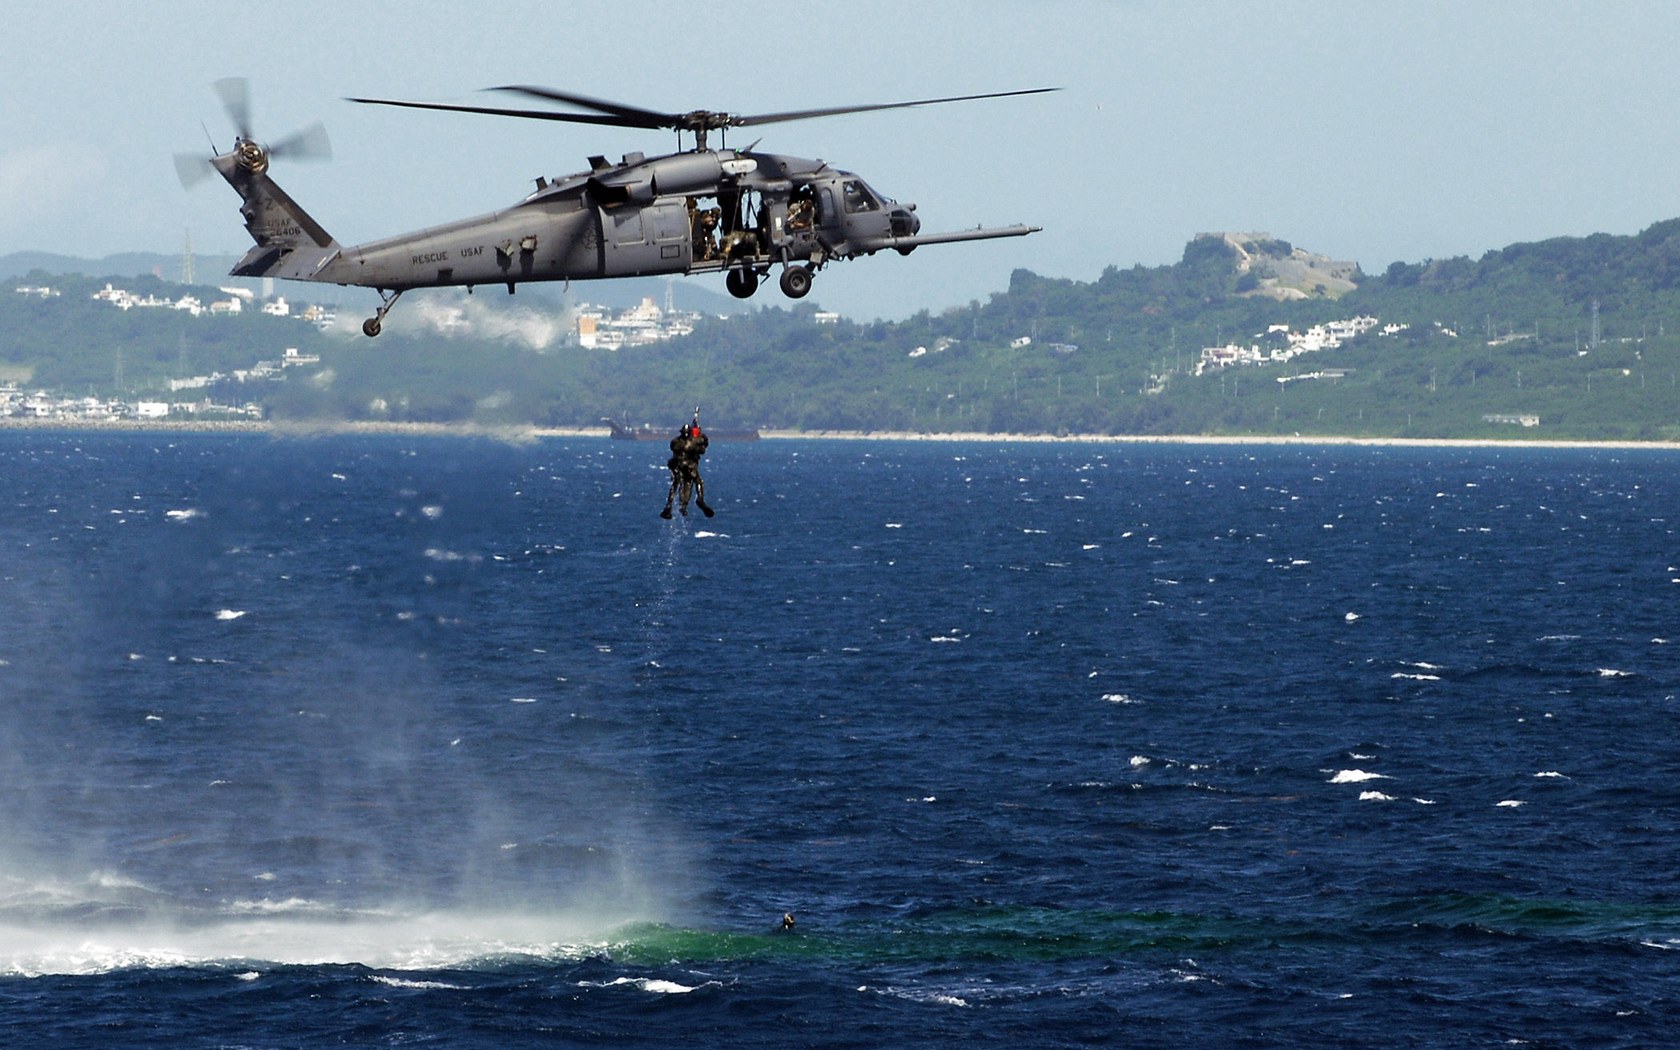 Download HQ HH-60G Pave Hawk Helicopter wallpaper / 1680x1050